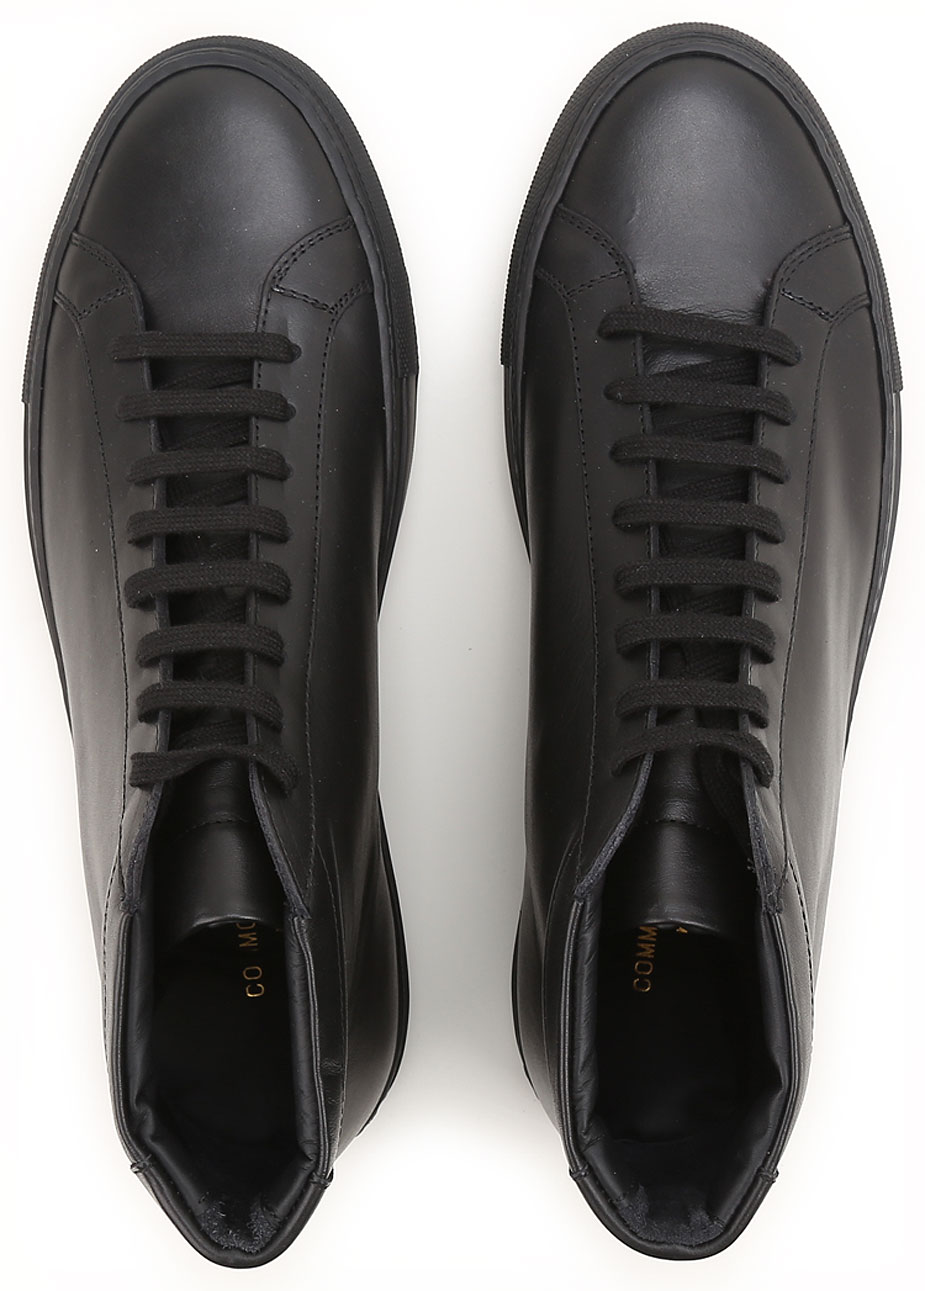 Mens Shoes Common Projects, Style code: 1529-7547-